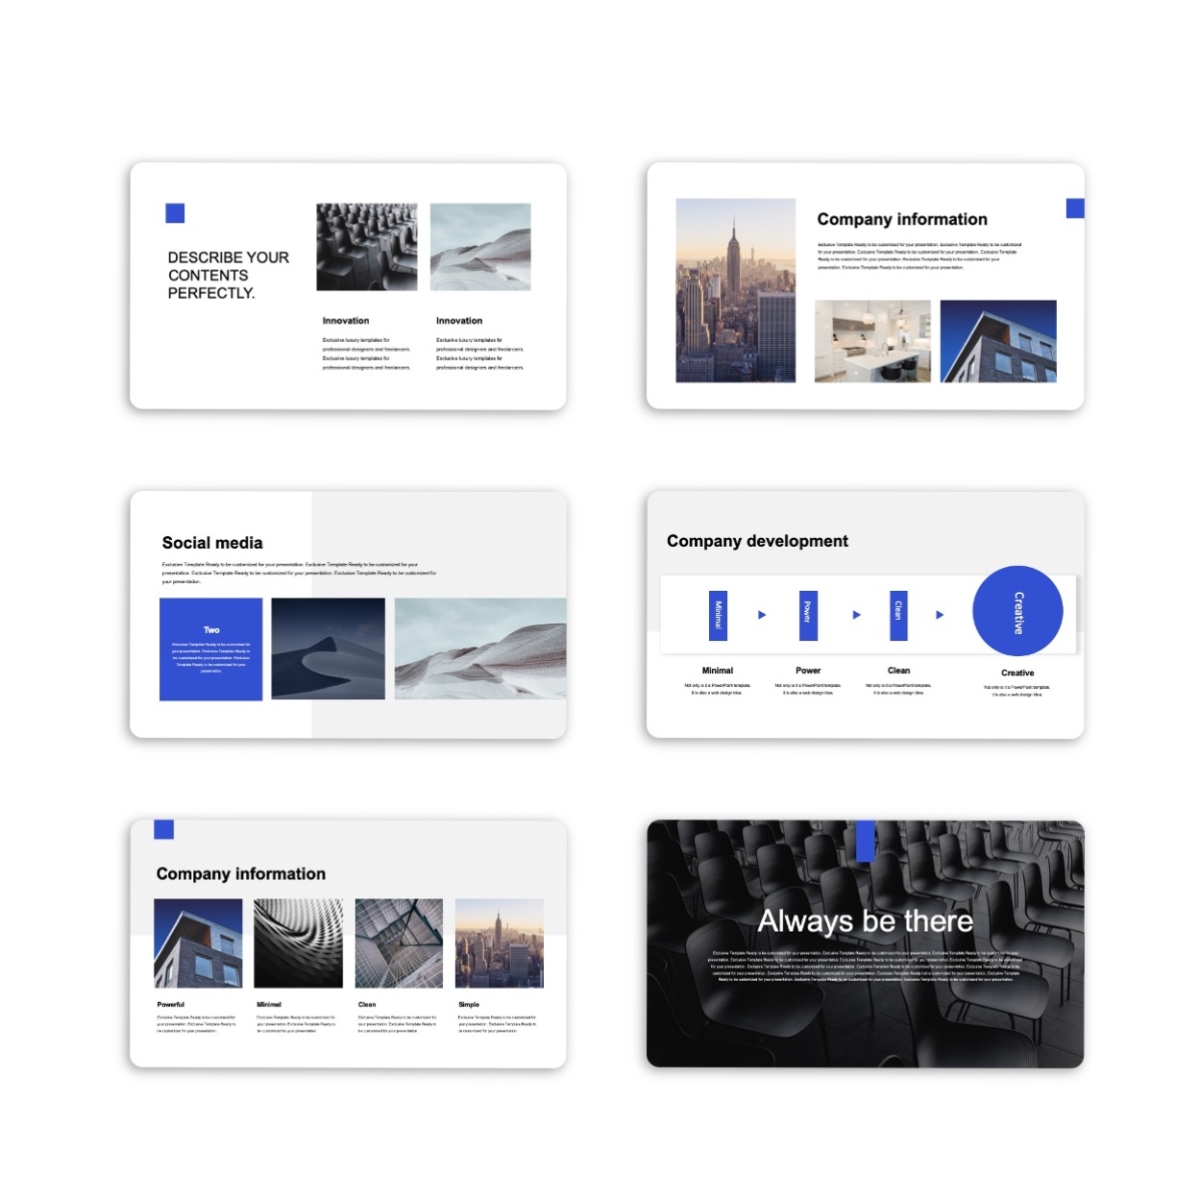 Google Slides-A Clean Company Introduction Presentation Template